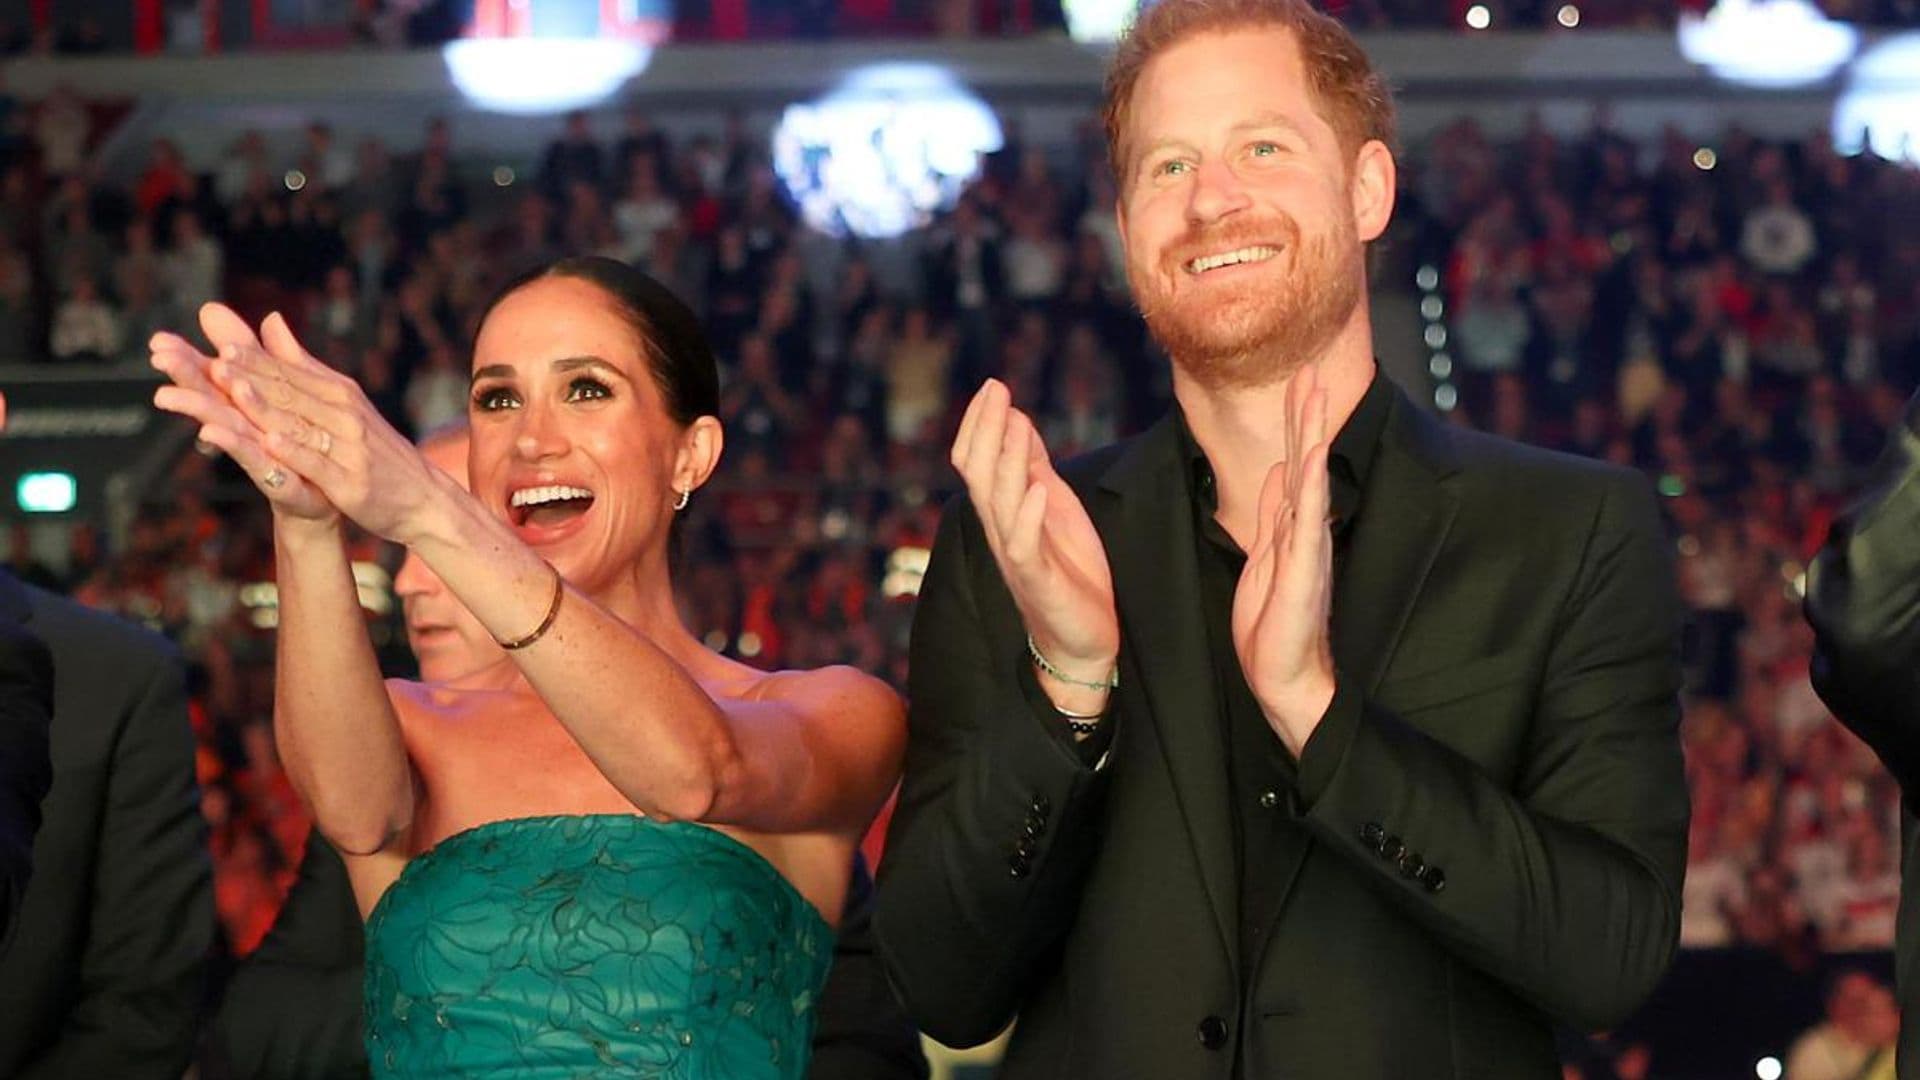 Meghan Markle and Prince Harry have night out in Las Vegas